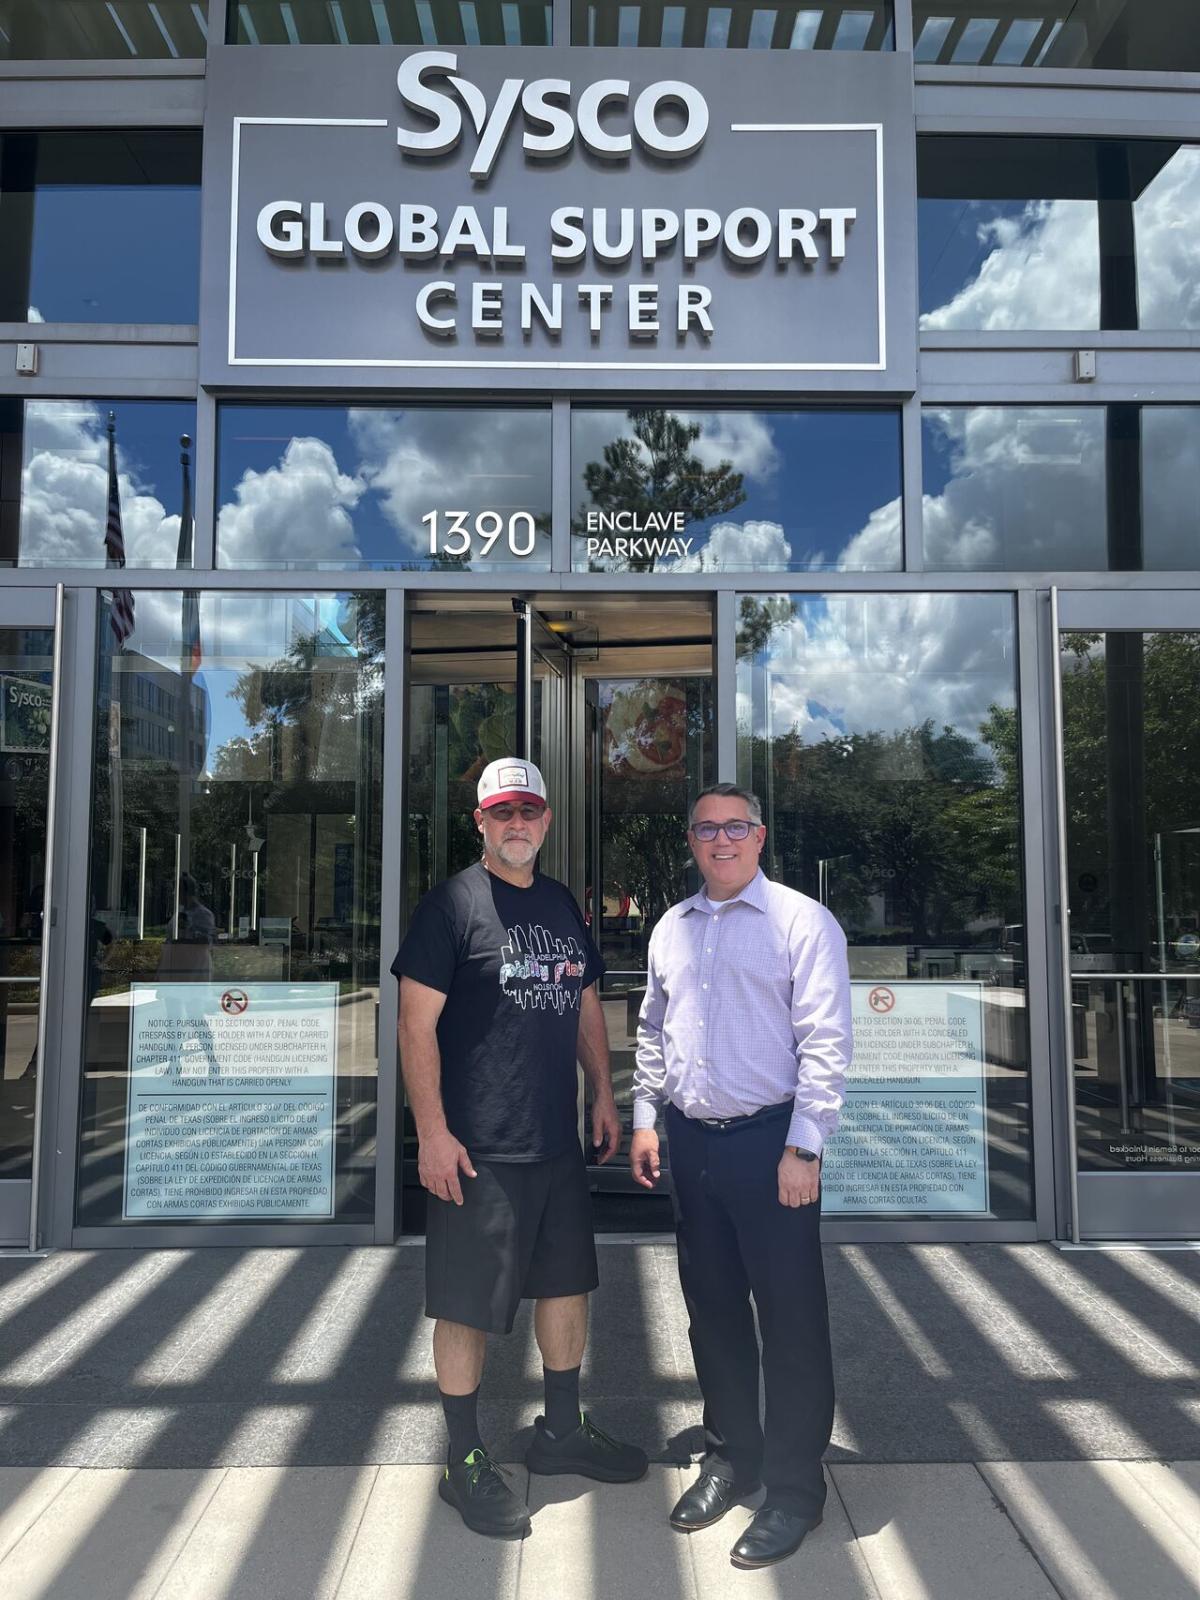 2 people stand together outside the Sysco Global support Center